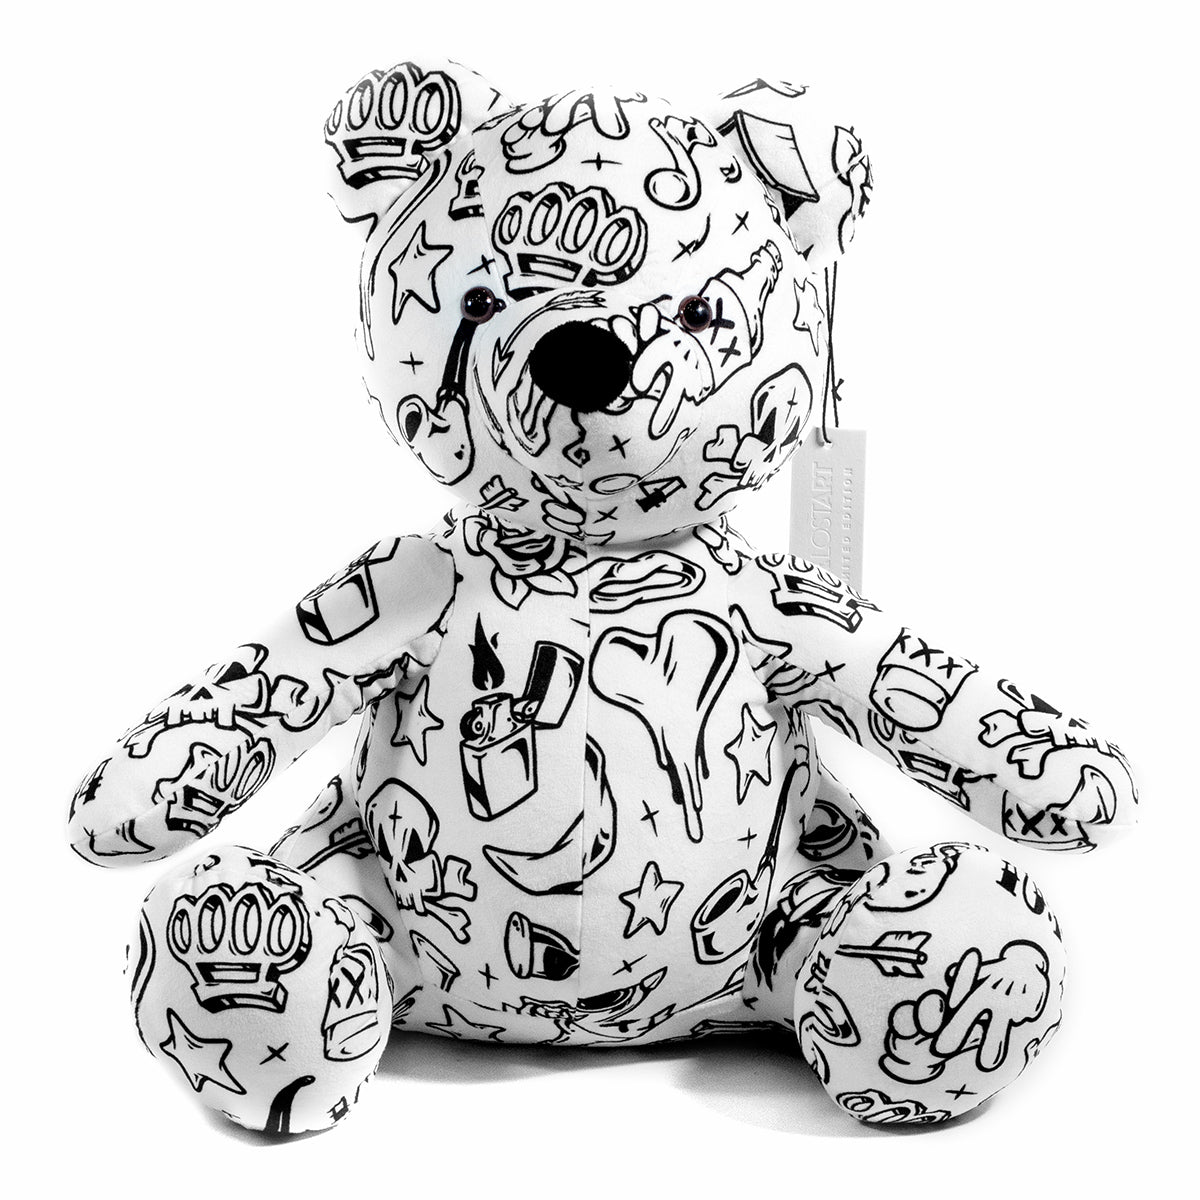 Lost Art Canada - white black patterned teddy bear front view